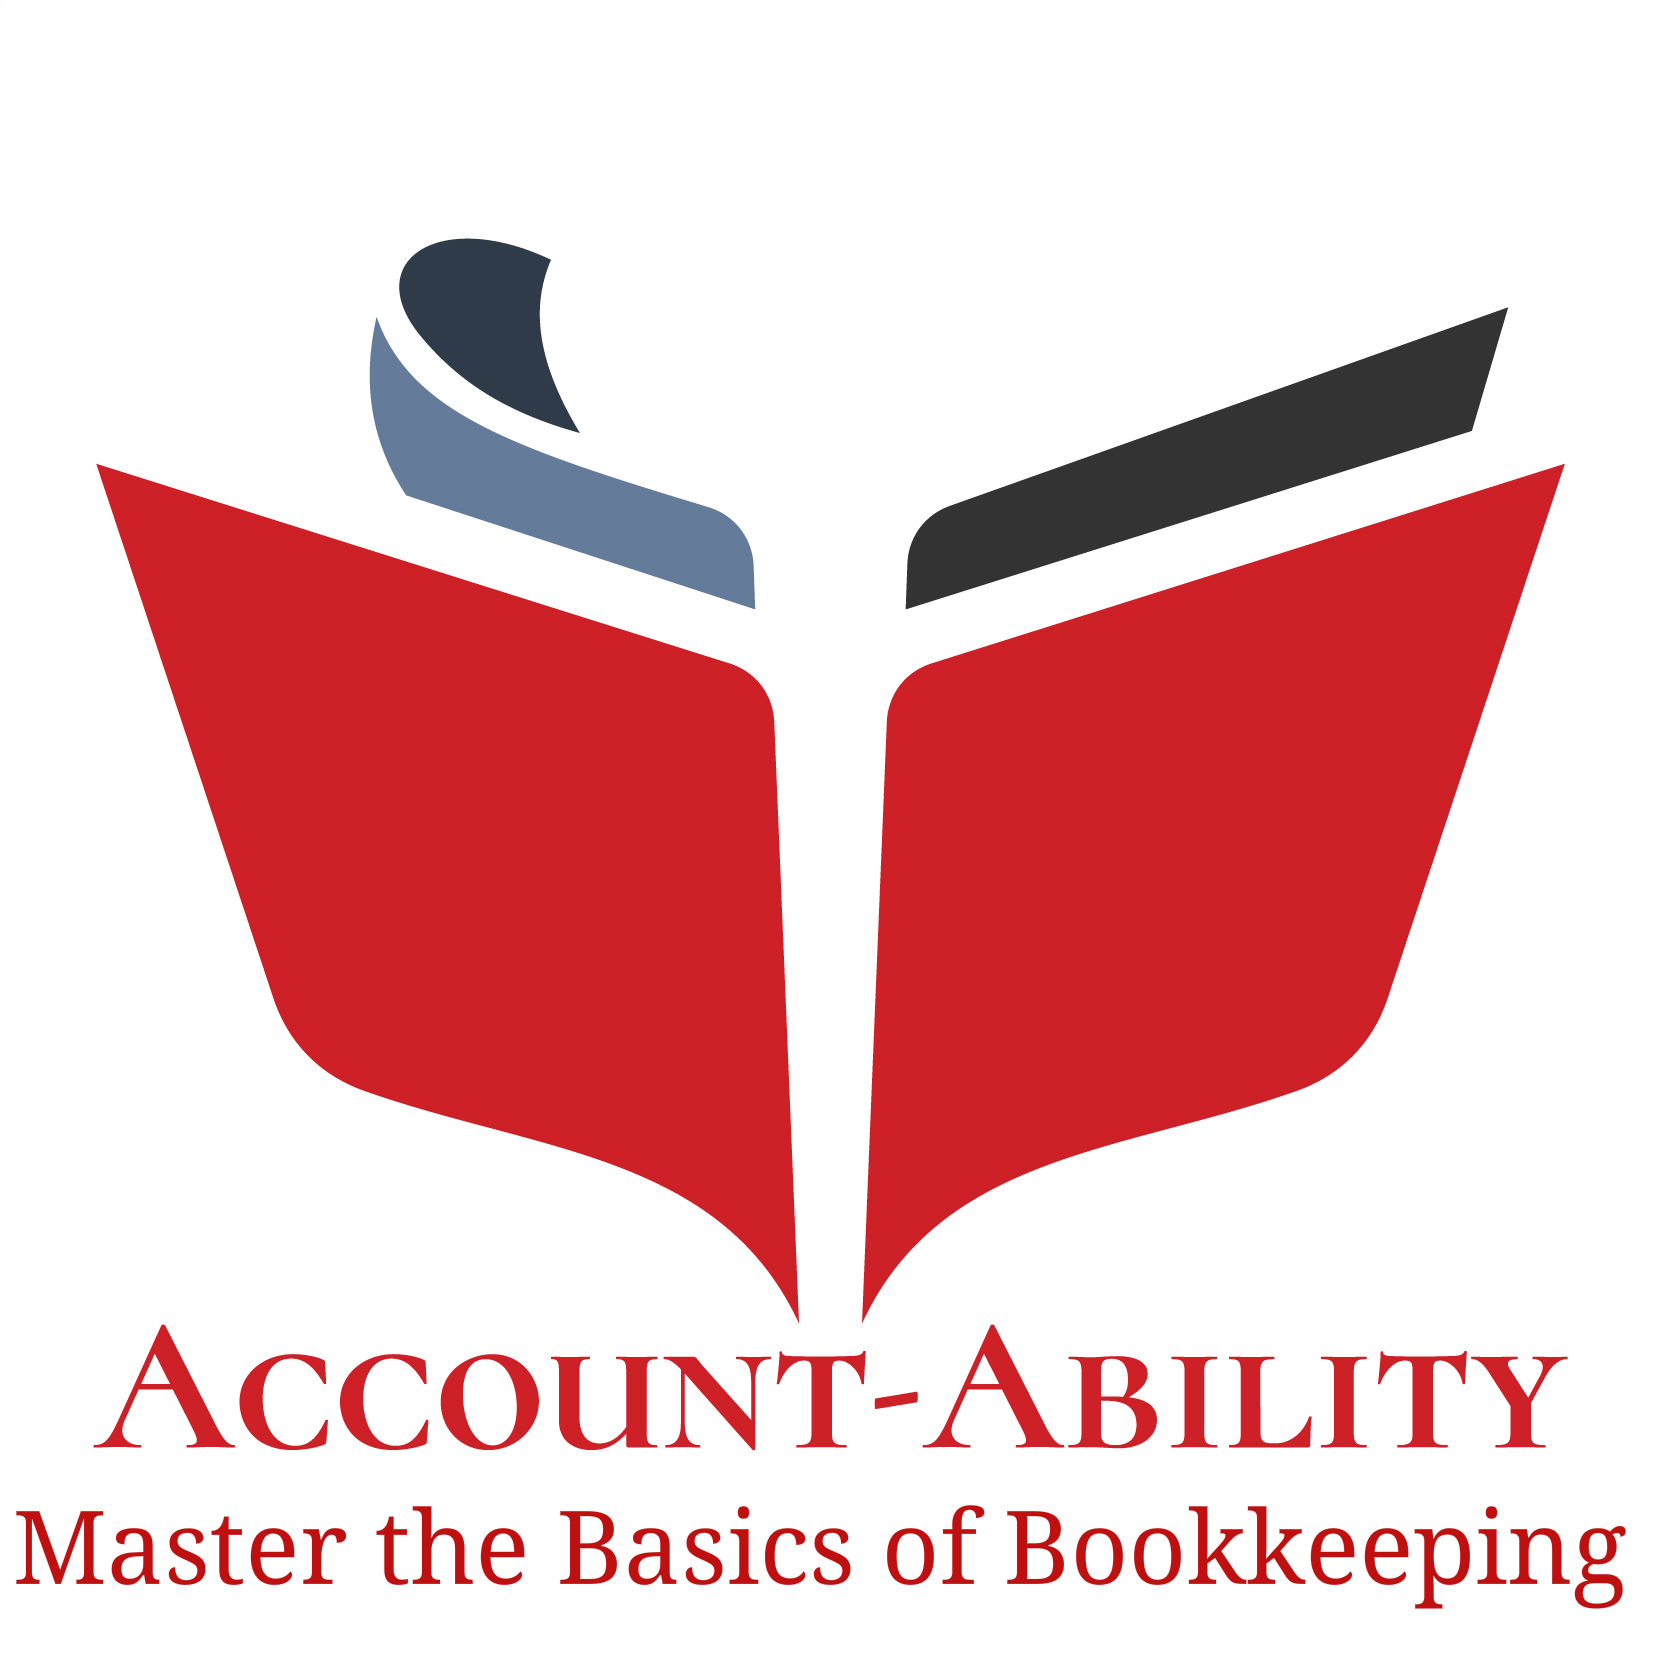 Master the basics of bookkeeping with Account-Ability